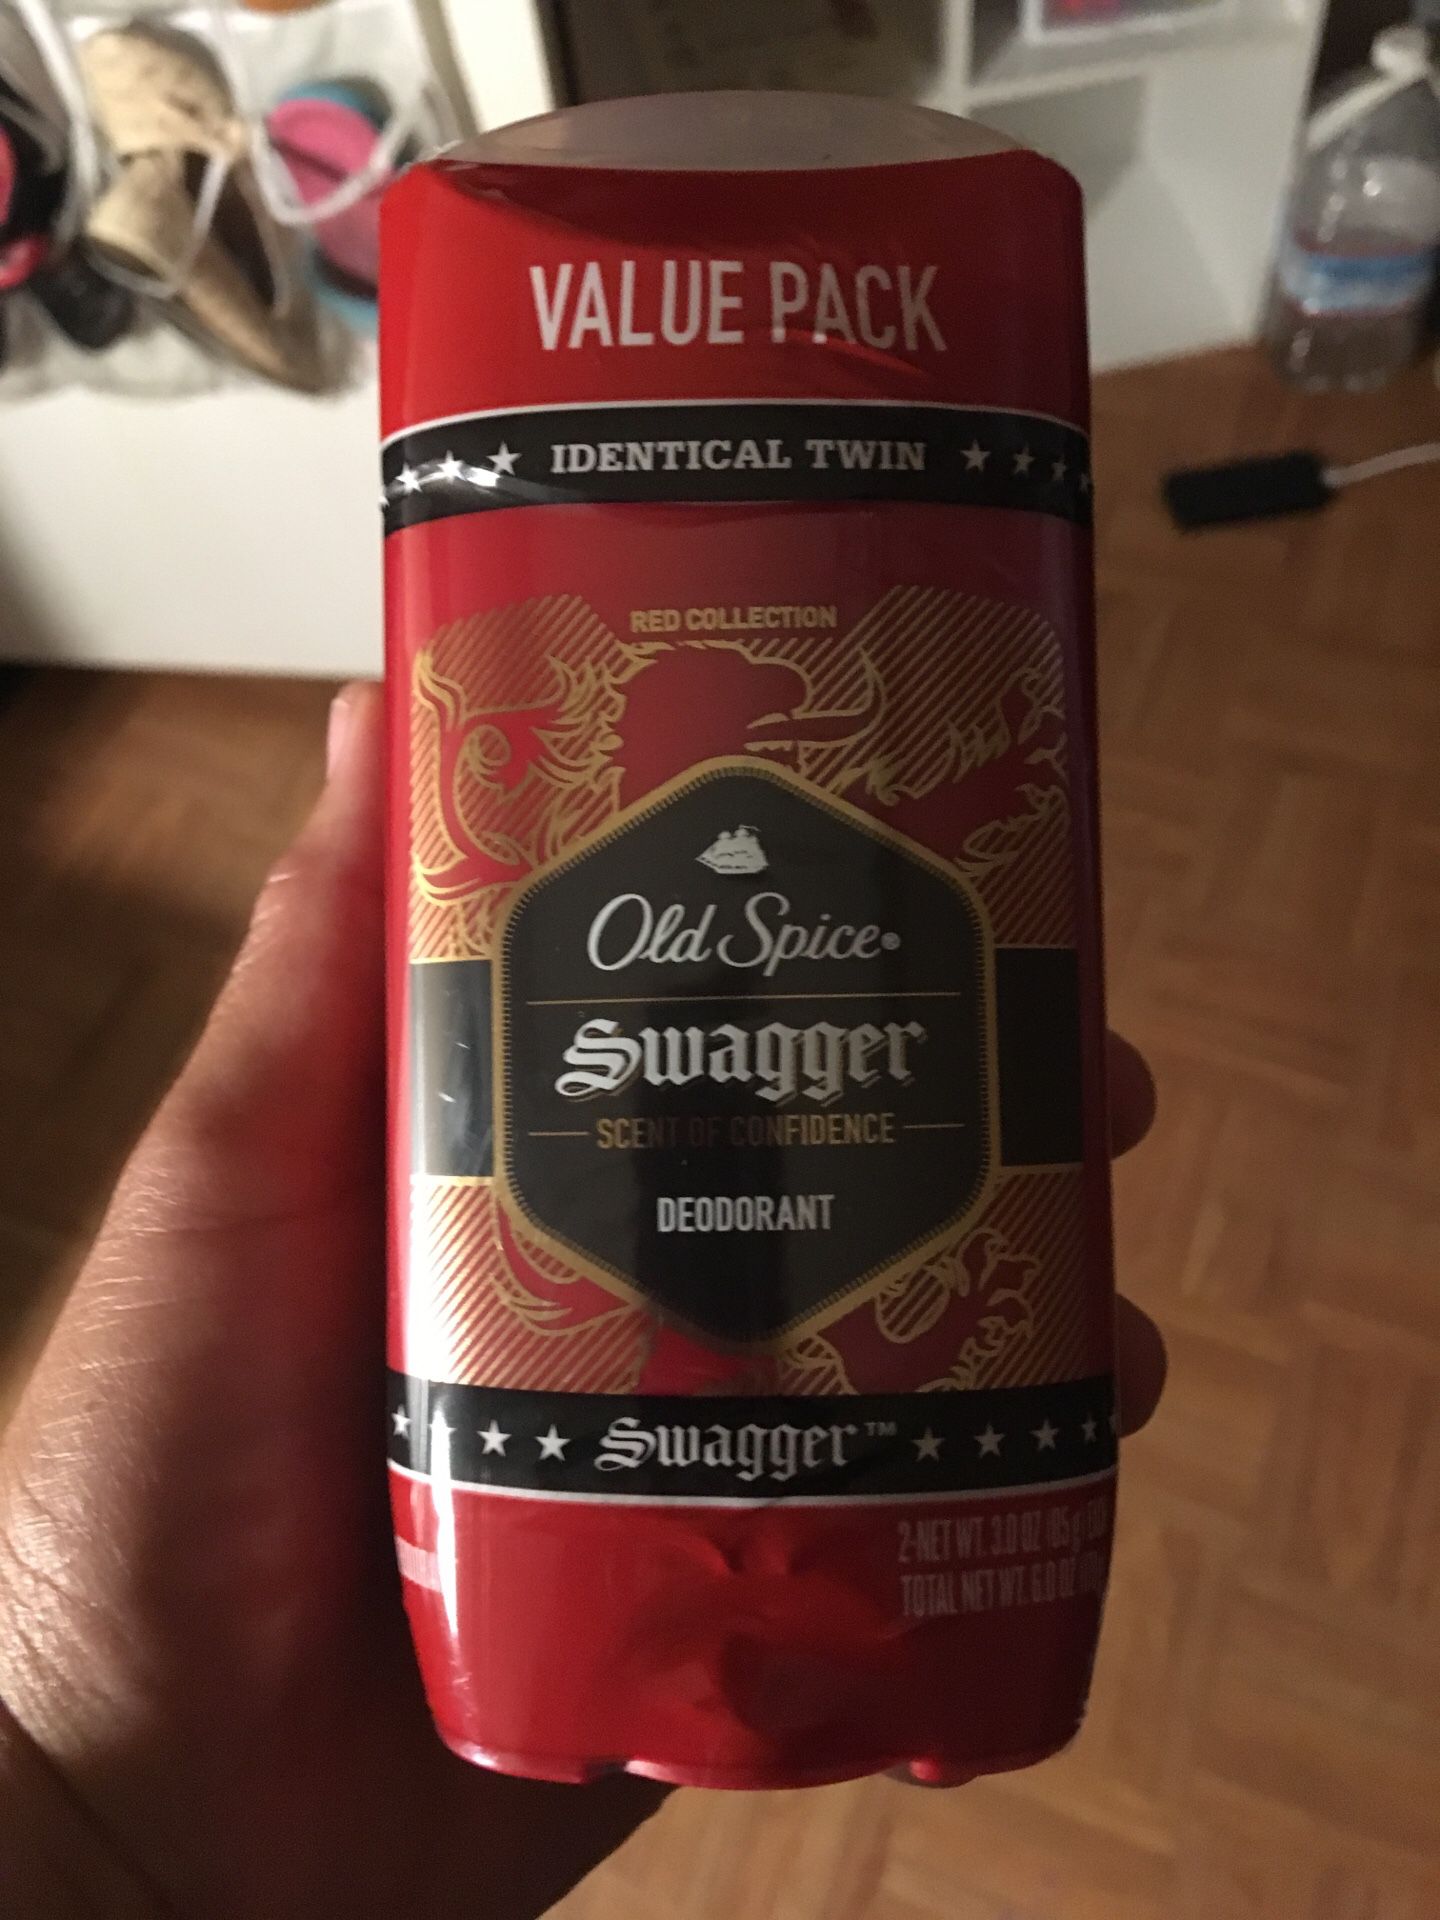 Old spice swagger deodorant